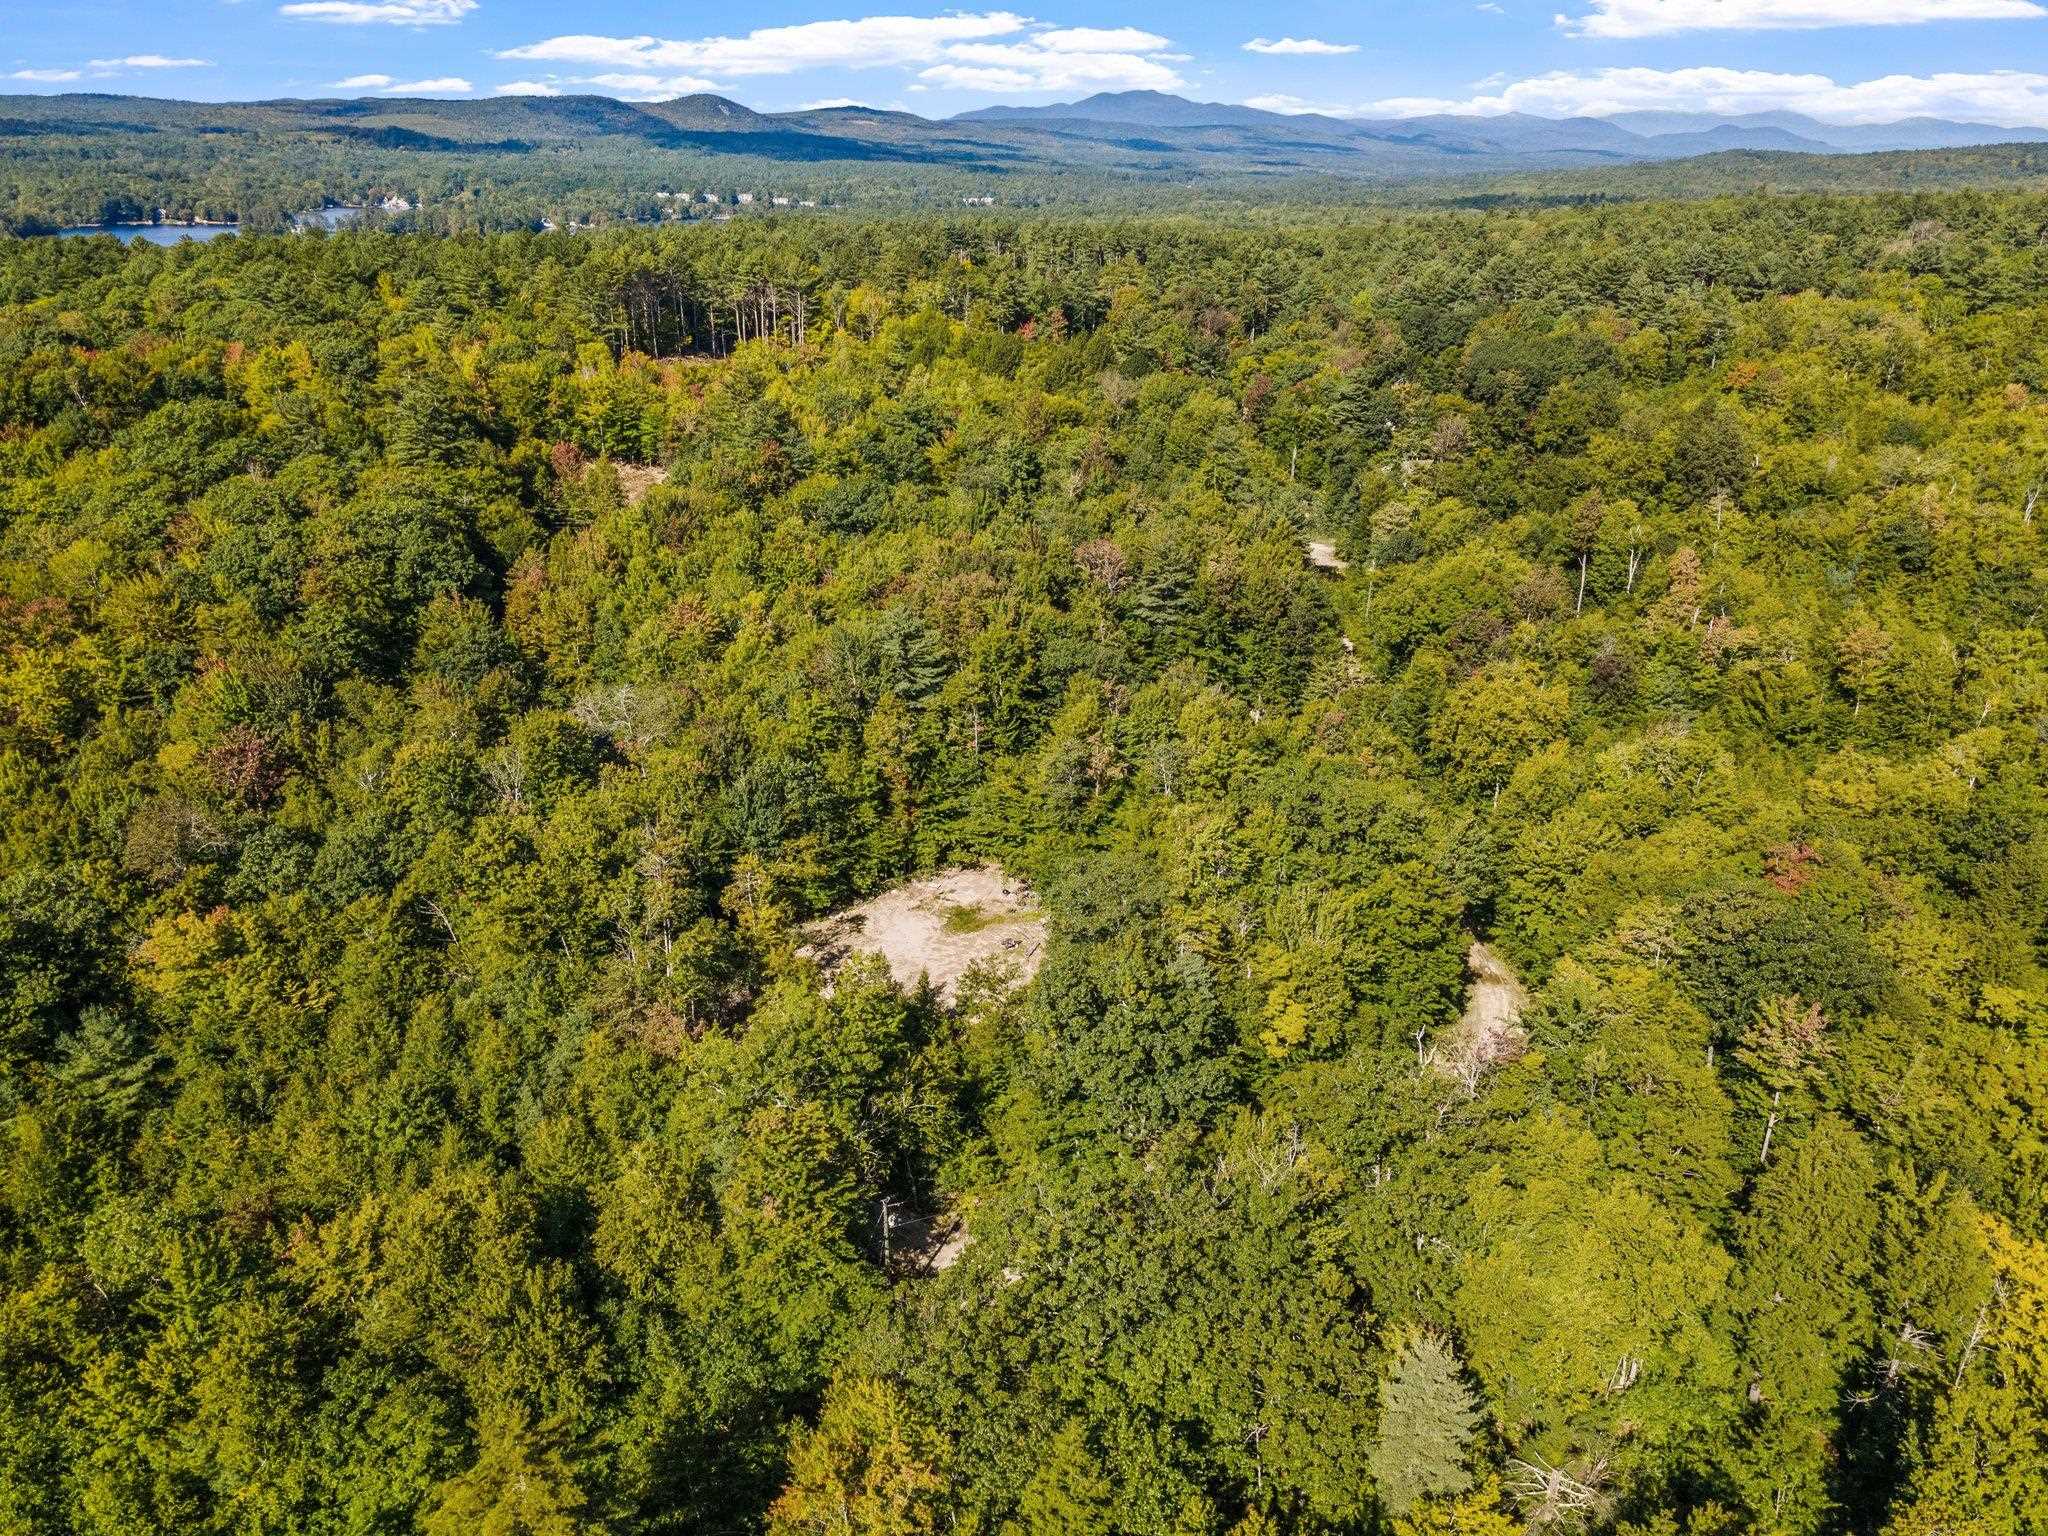 WAKEFIELD NH Land / Acres for sale